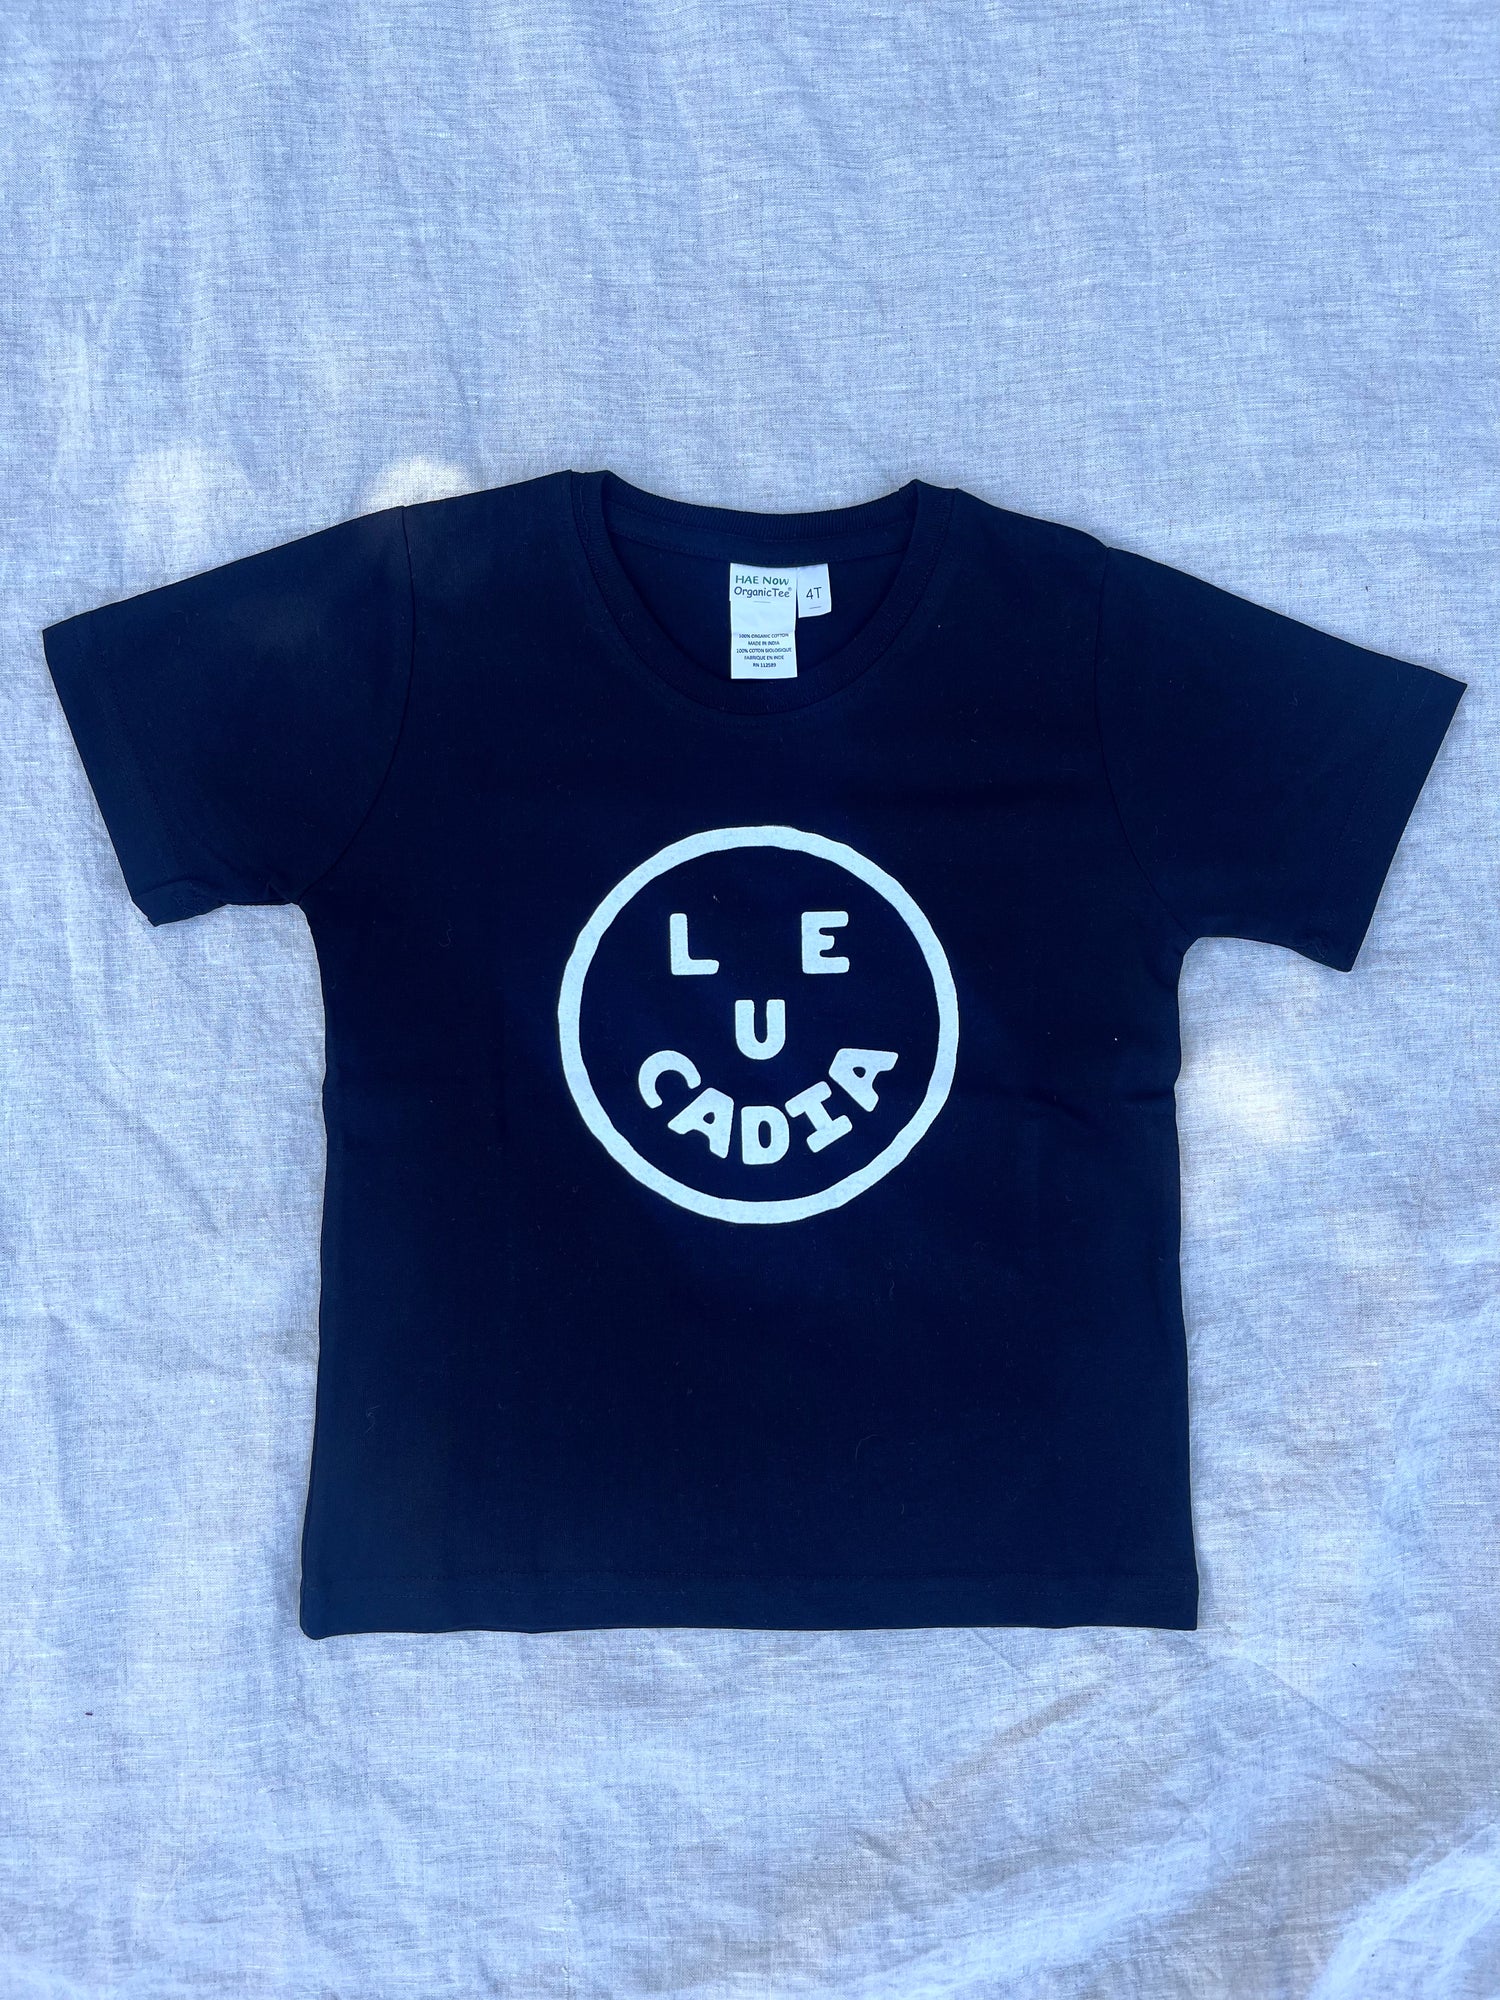 A fun little organic kids tee with a super cute little Leucadia smiley face by local artist Zach Smith. Printed on an organic cotton, fair trade tee with all proceeds to San Diego area families facing housing insecurity. Keep it funky, keep it kind, keep it local.